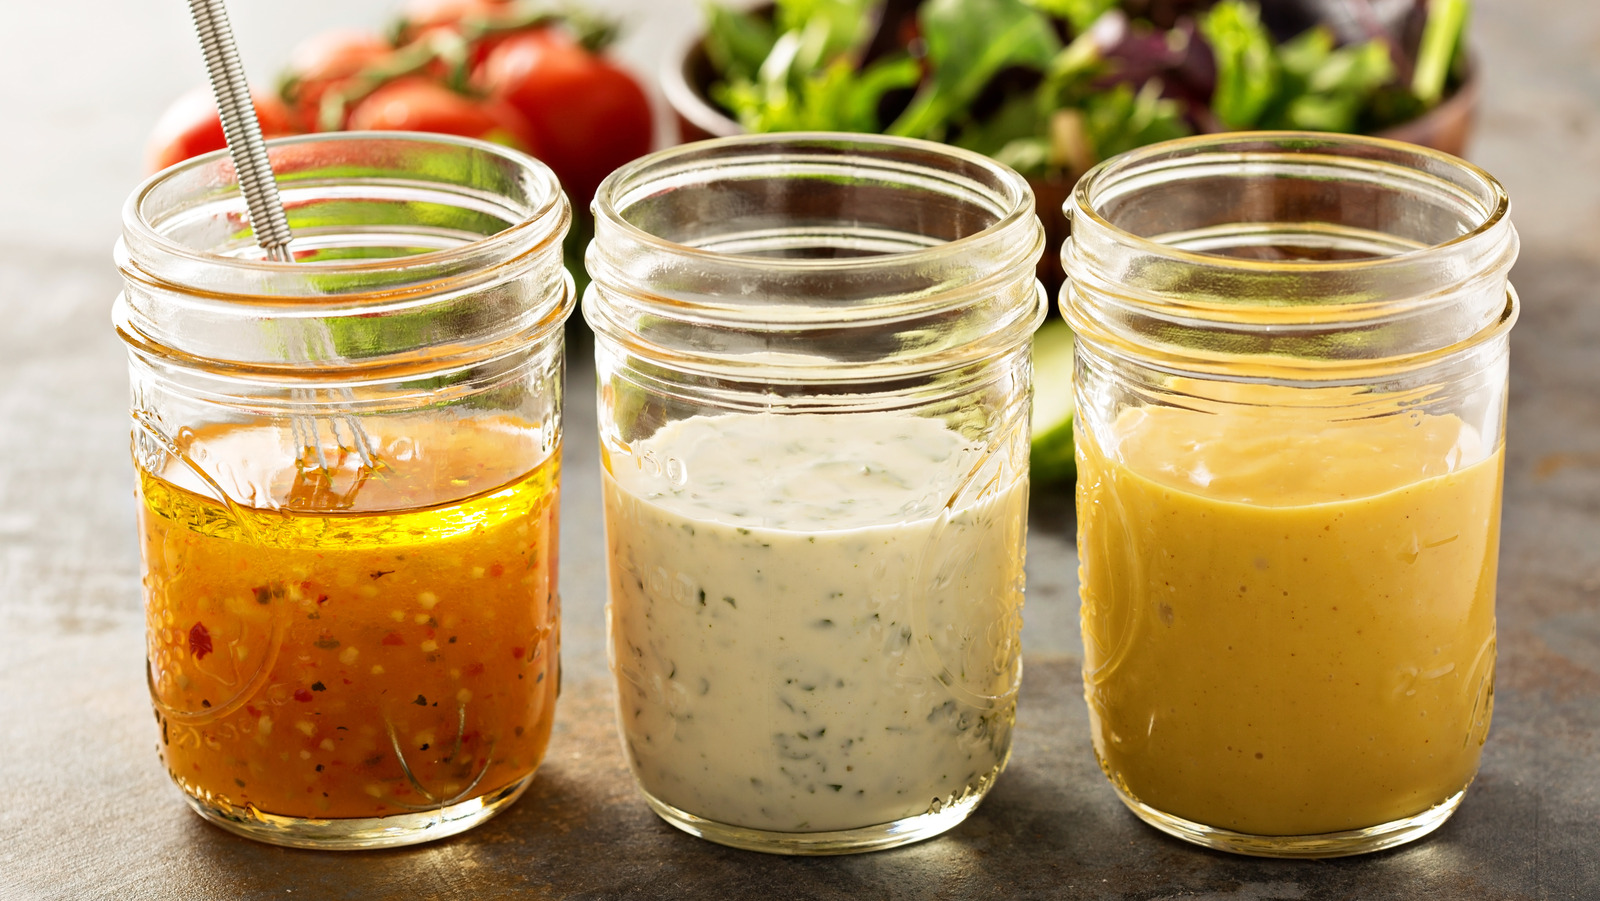 https://www.tastingtable.com/img/gallery/the-quick-way-to-tell-if-homemade-salad-dressing-has-expired/l-intro-1663852948.jpg